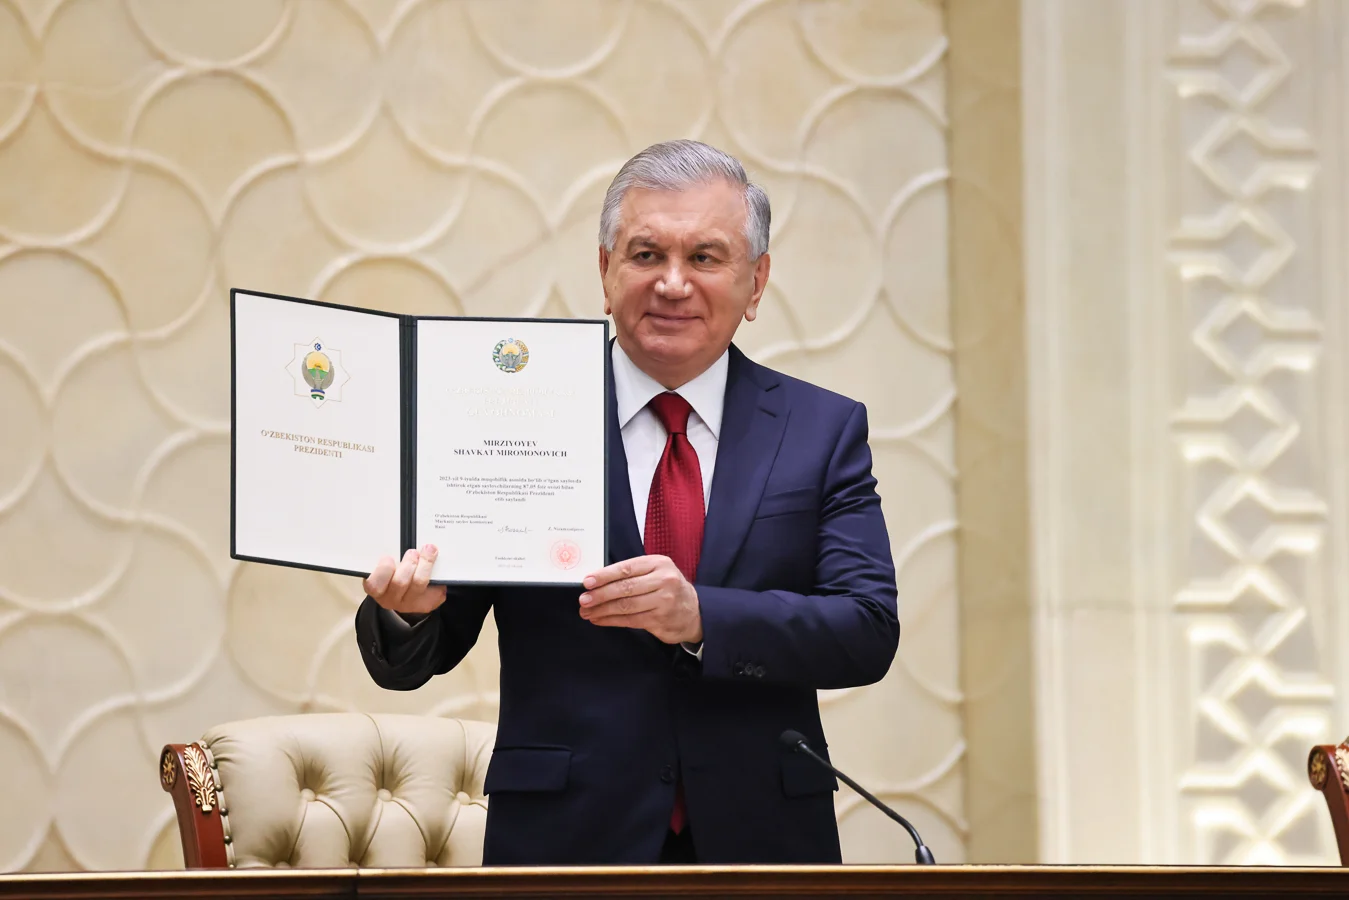 Shavkat Mirziyoyev sworn in as president of Uzbekistan, vows to uphold  rights and serve citizens — Daryo News